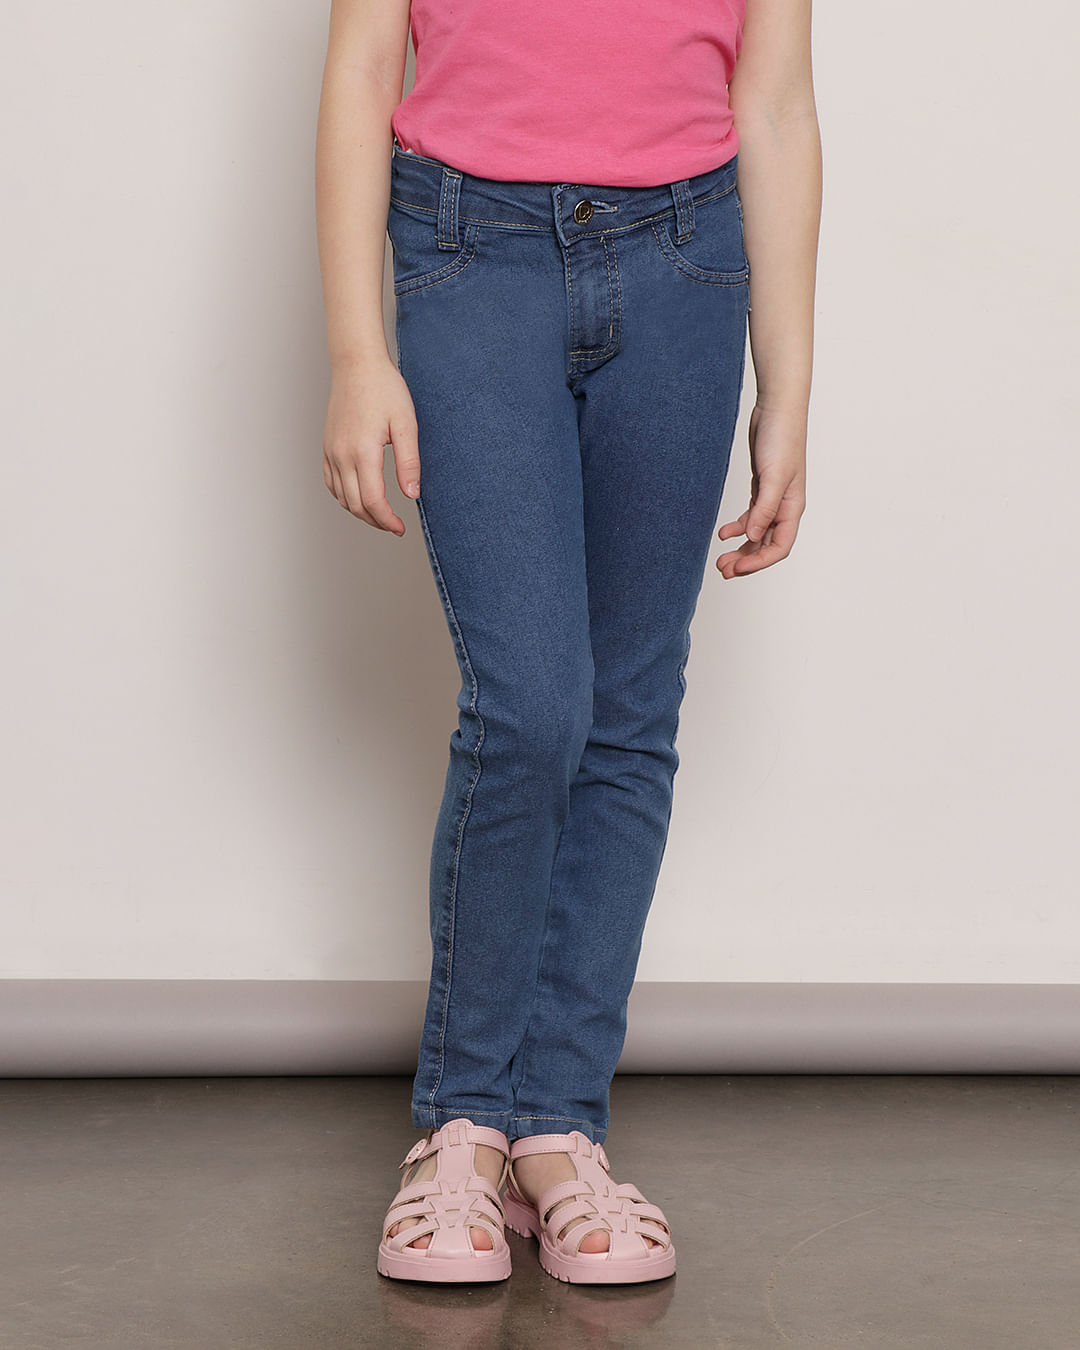 Calca-Jeans-10019-6812-Lc-Bsc-F-48---Blue-Jeans-Claro